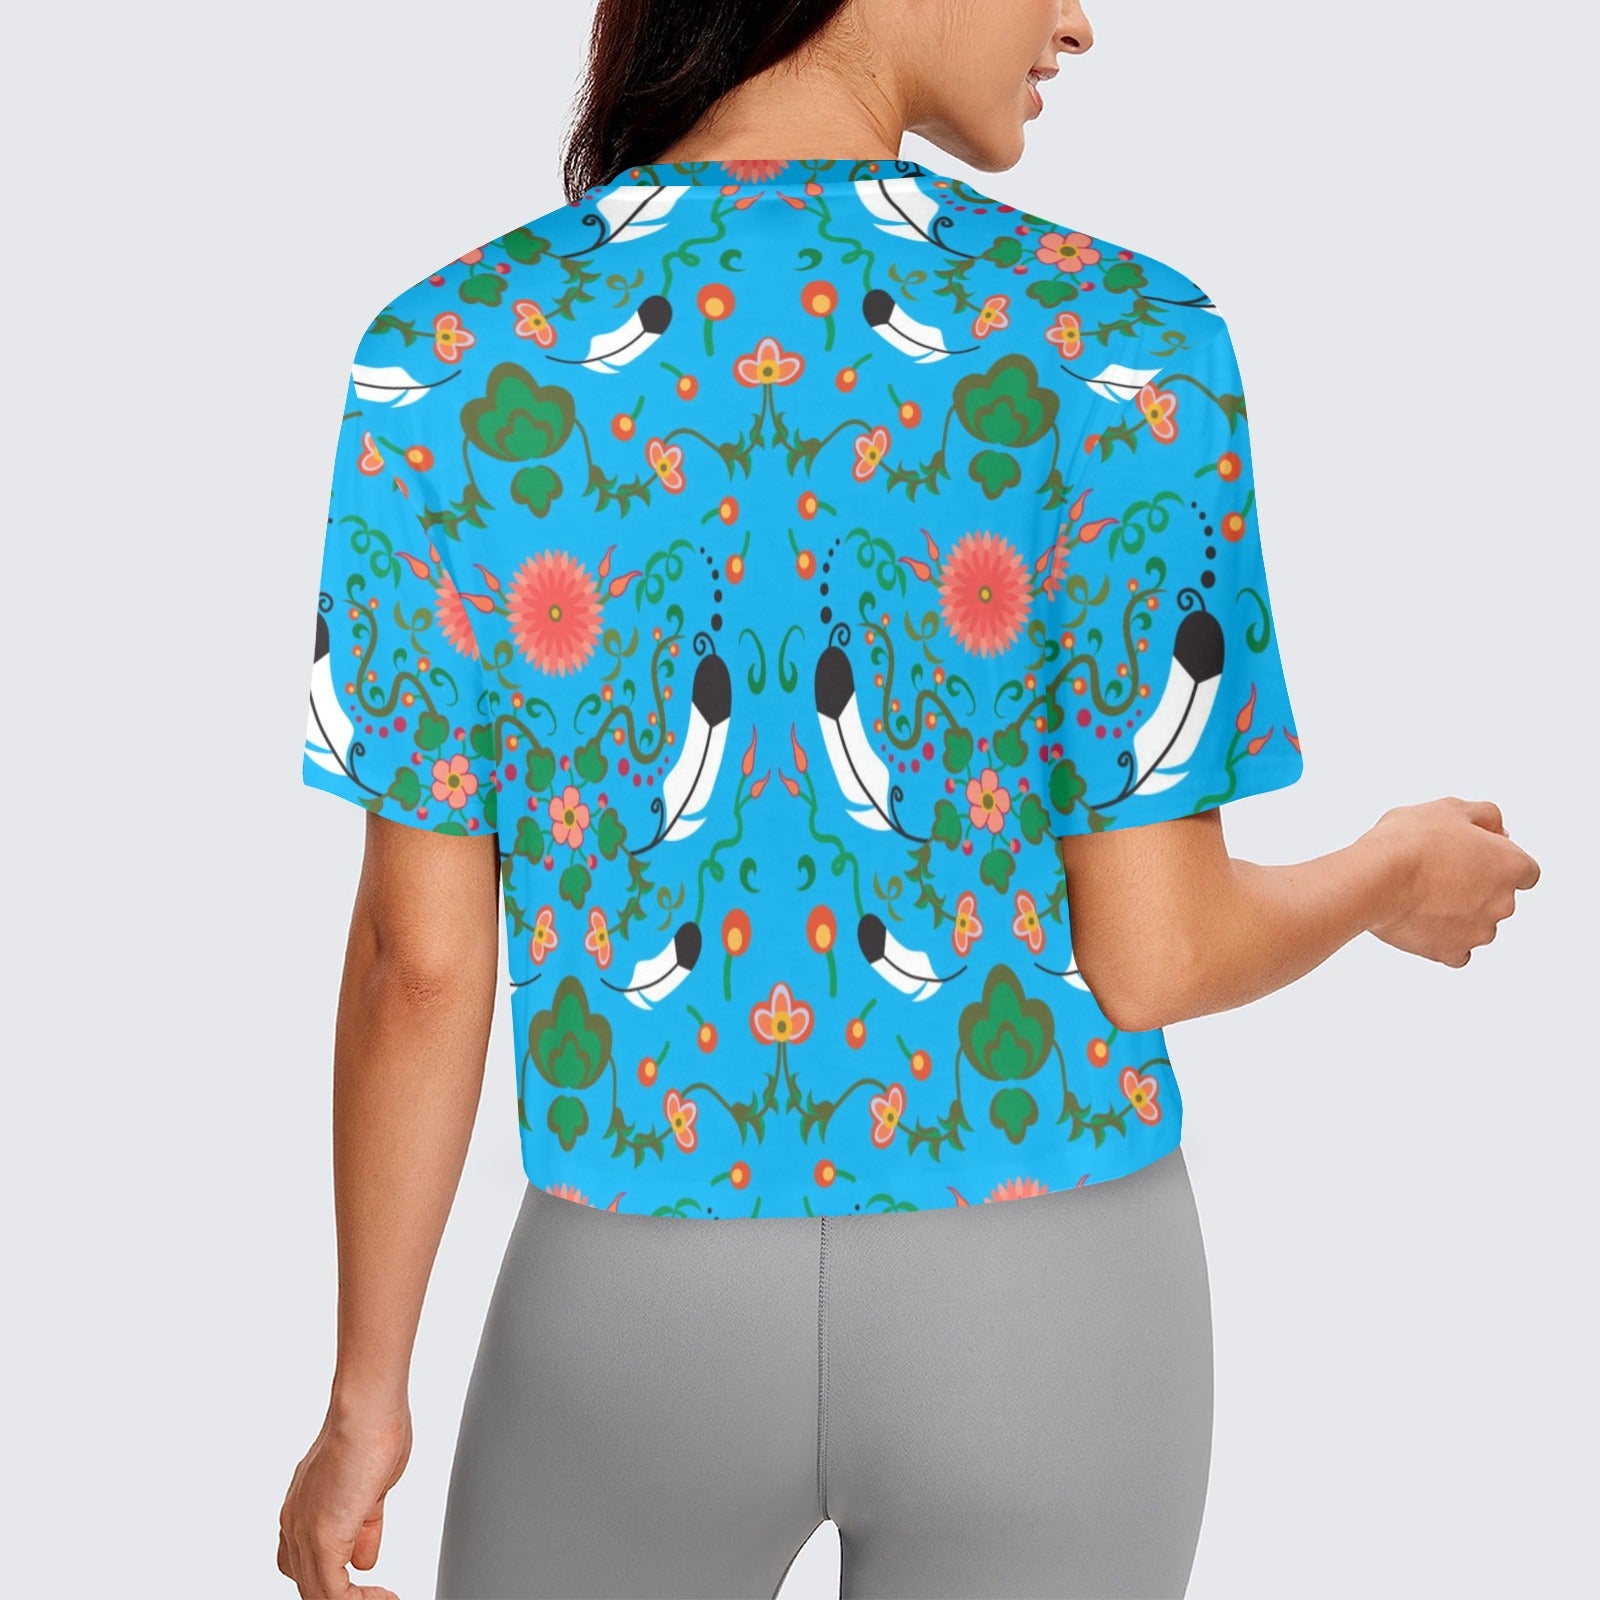 New Growth Bright Sky Women's Cropped T-shirt